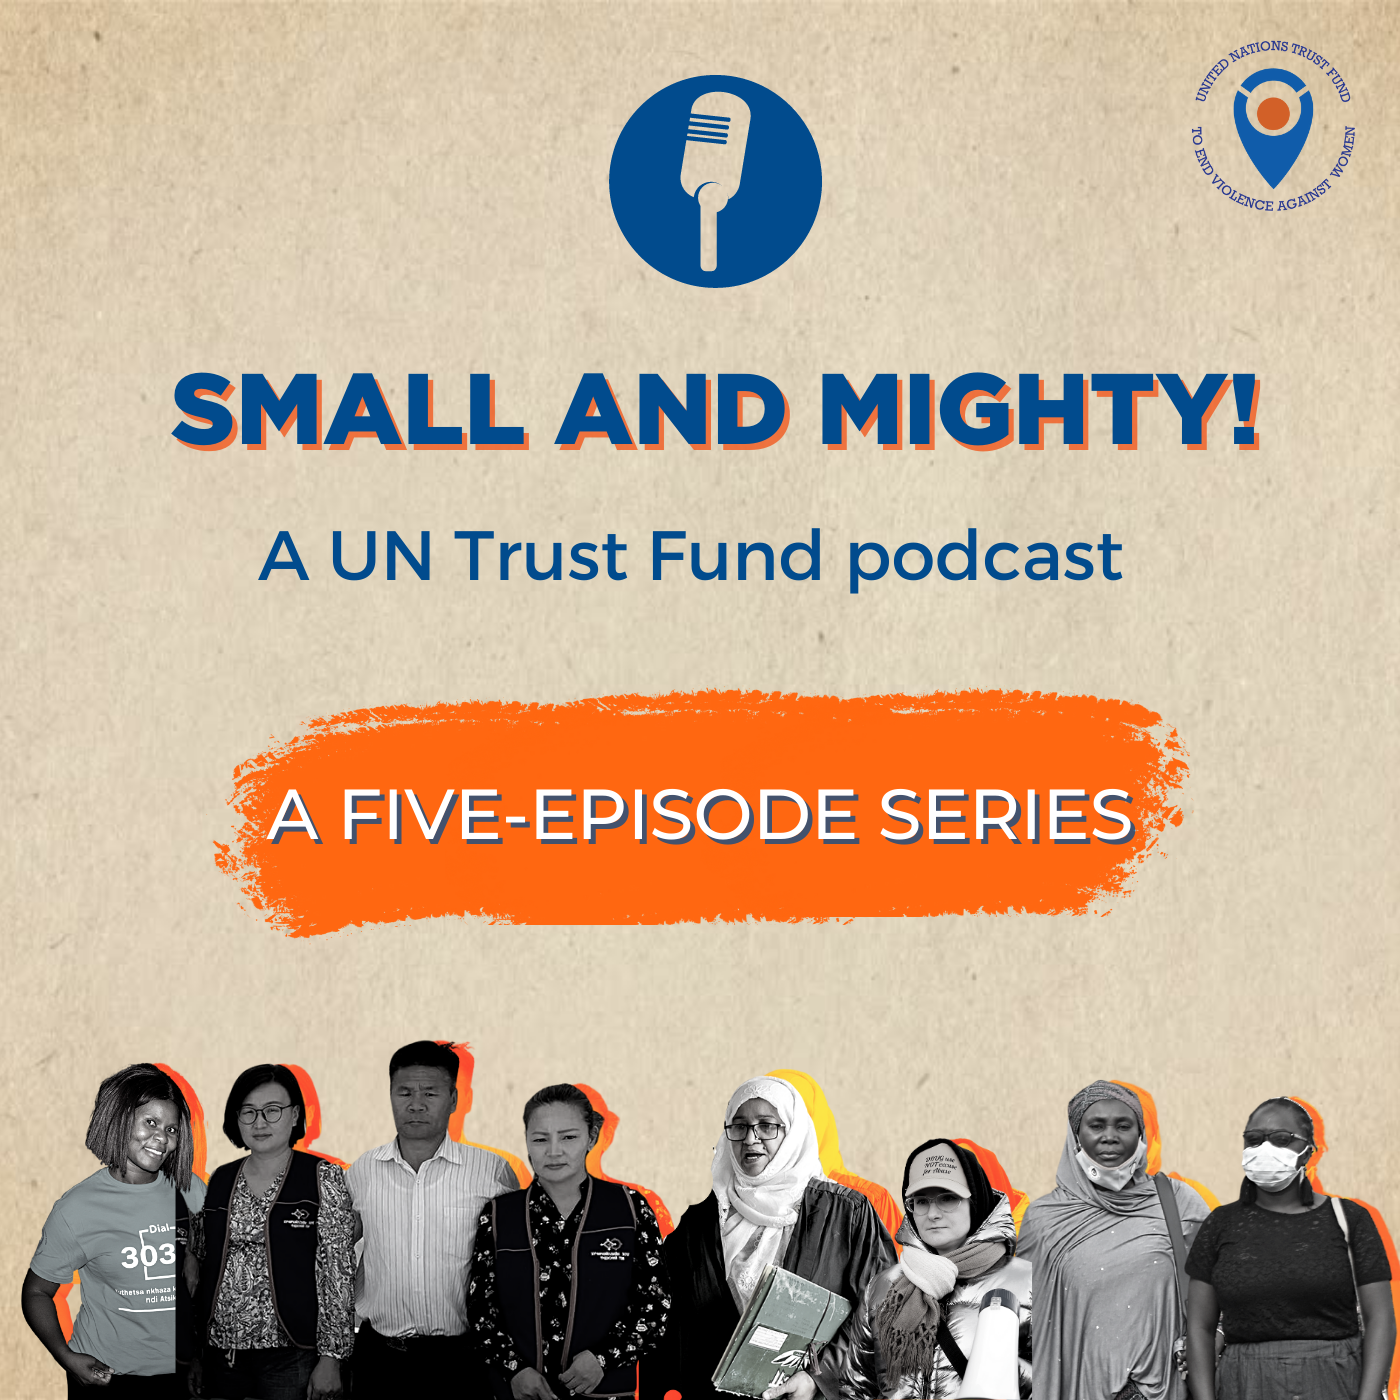 Small and Mighty! A UN Trust Fund podcast - a five-episode series